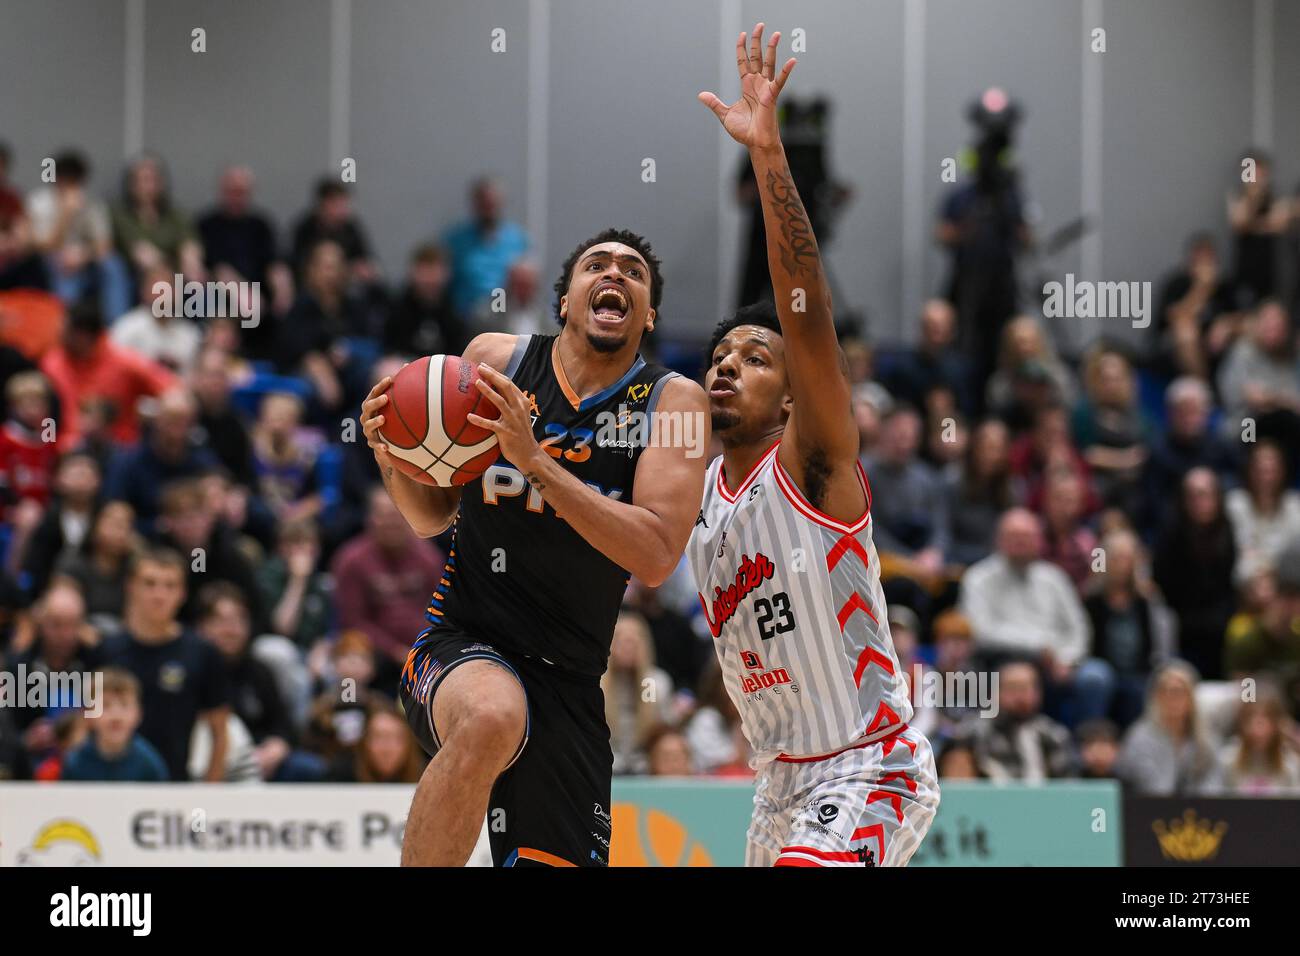 Ethan Chargois of Cheshire Phoenix drives for the basket during the British Basketball Championship match Cheshire Phoenix vs Leicester Riders at Ellesmere Port Sports Village, Ellesmere Port, United Kingdom, 12th November 2023 (Photo by Craig Thomas/News Images) Stock Photo